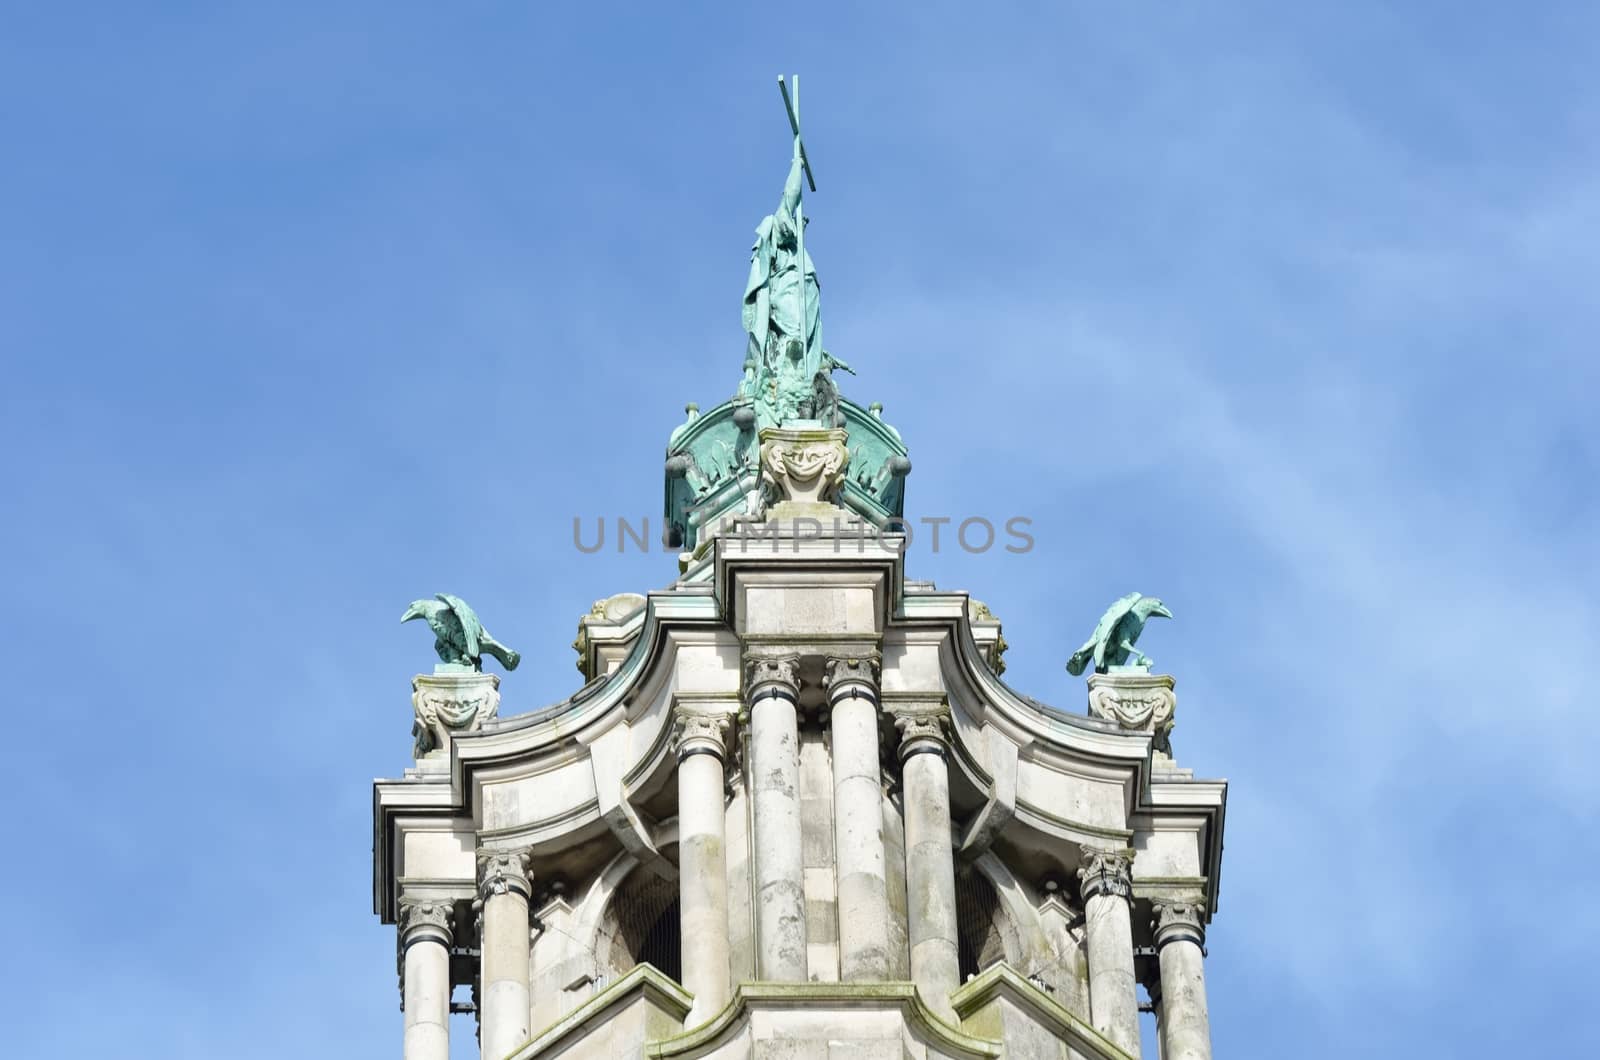 Top of victorian town hall tower depicting St Helena